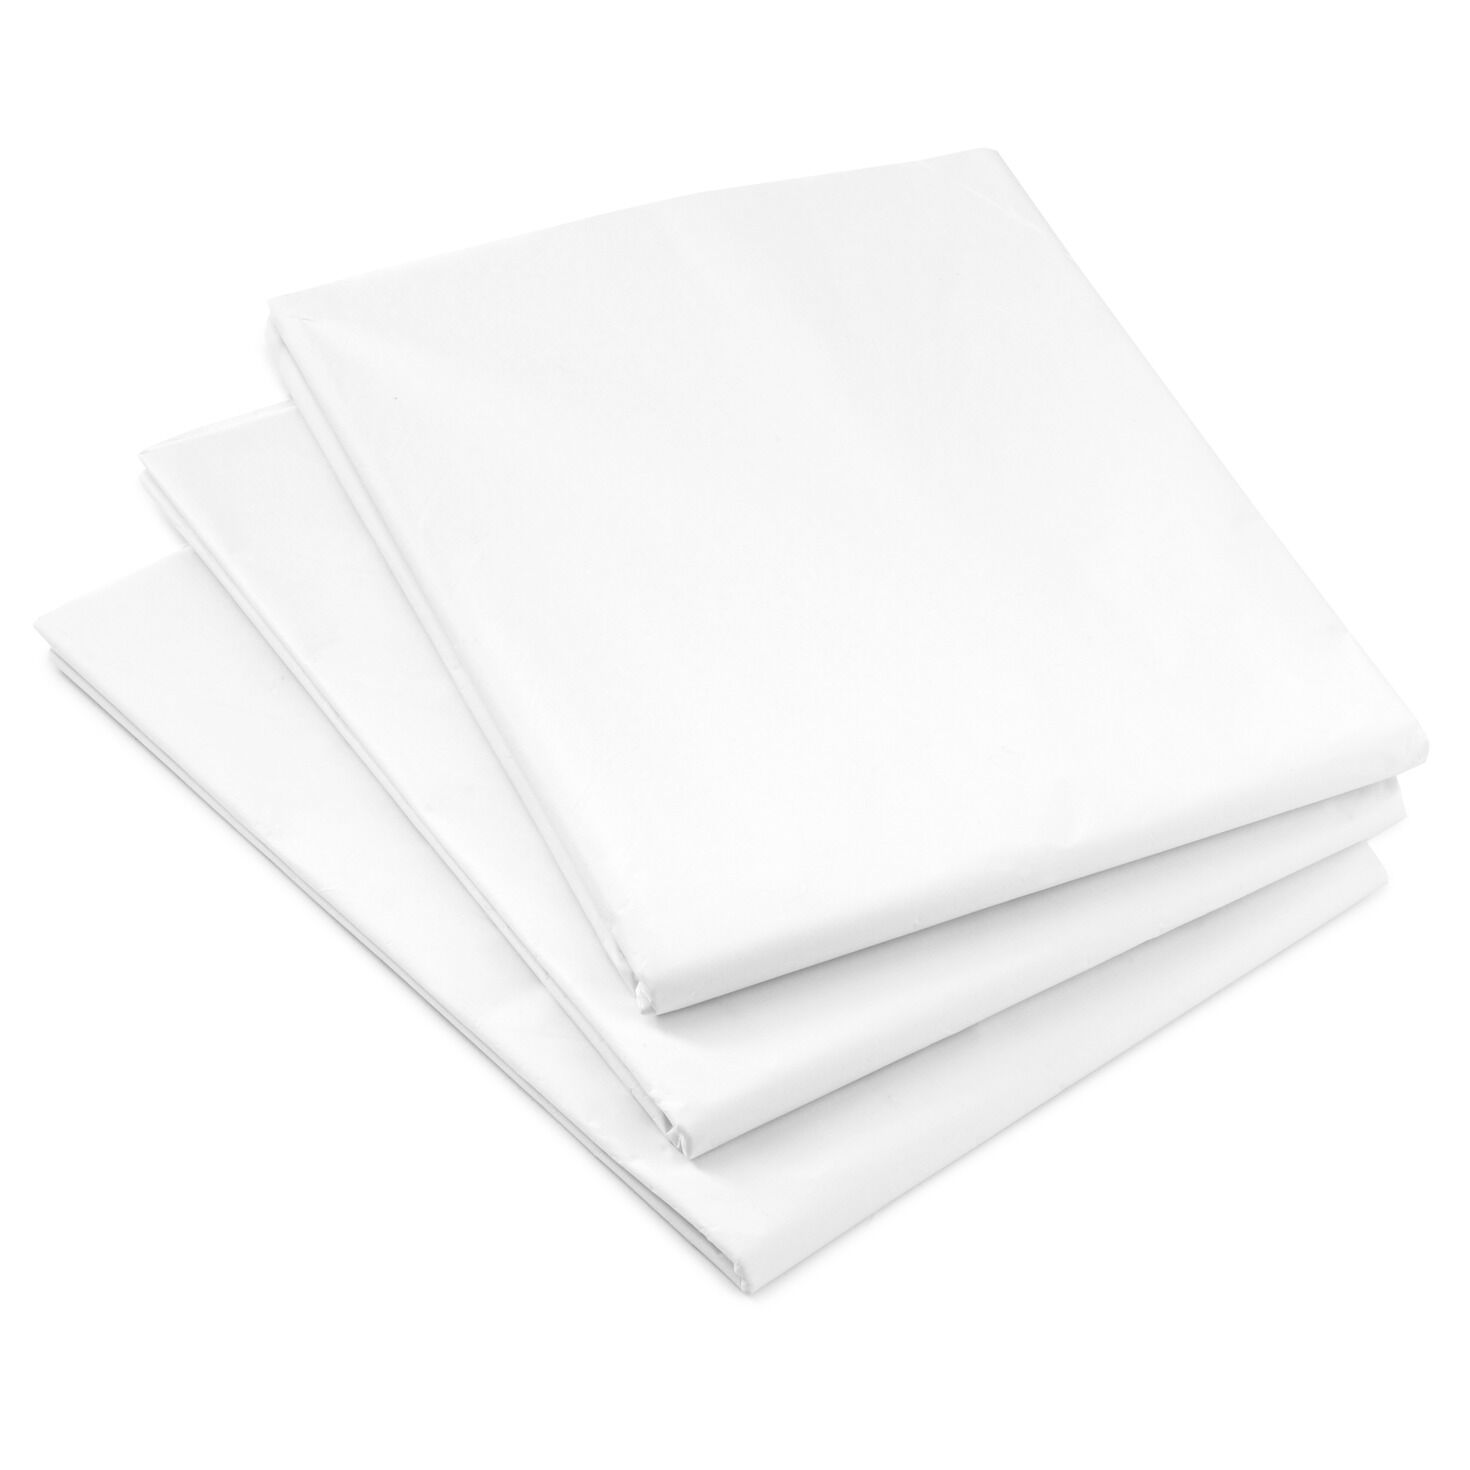 22 plain off white thin sheets for use inside gift bags White tissue paper 